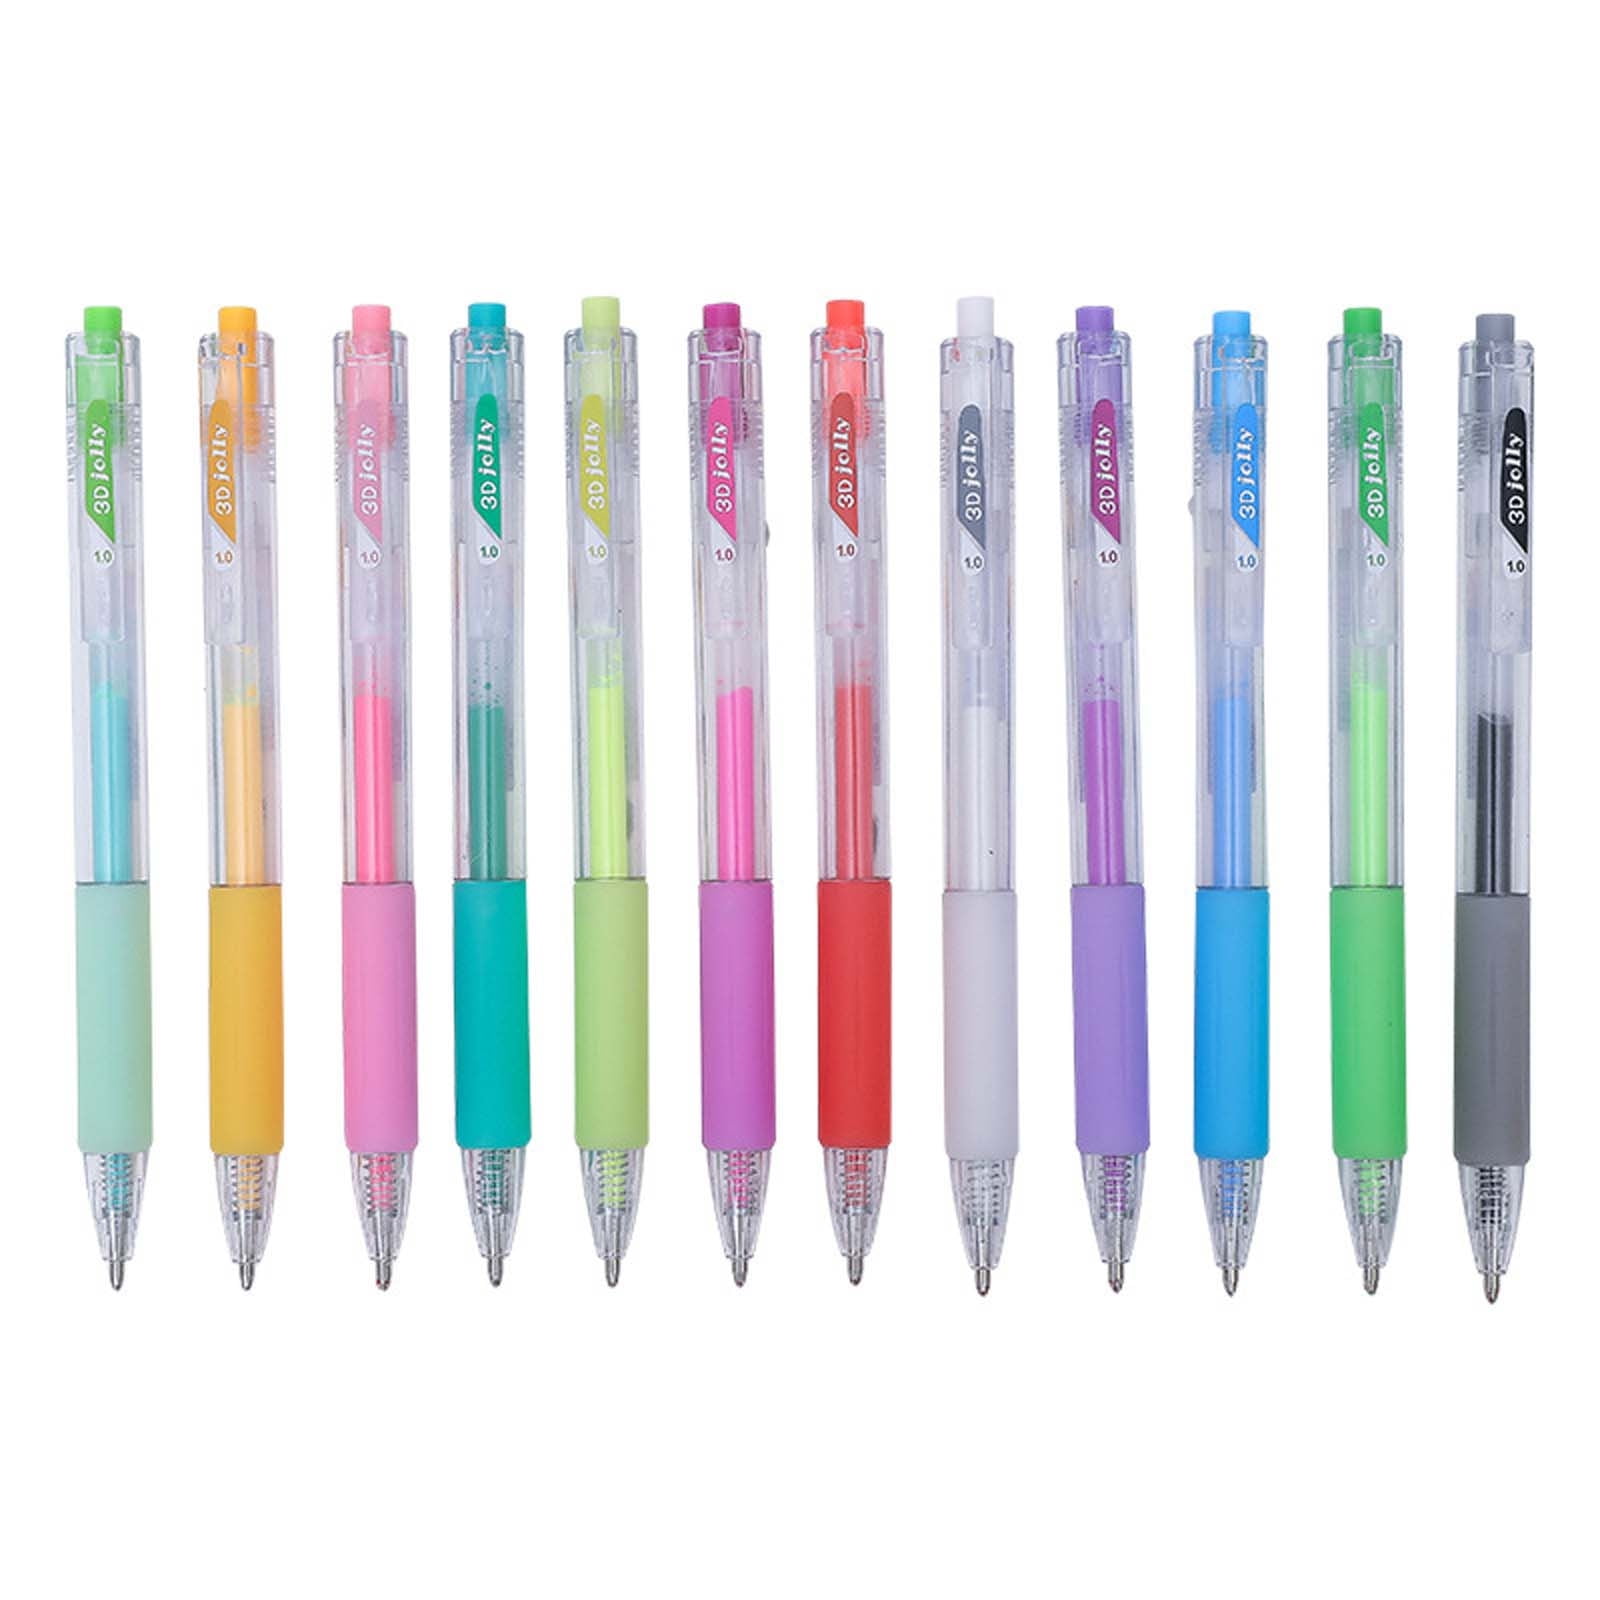  Magic Feier 3D Jelly Pen Set, Gel Pens Suitable on Glass for  DIY Painting Drawing Coloring, Plastic (6 Colors) : Arts, Crafts & Sewing